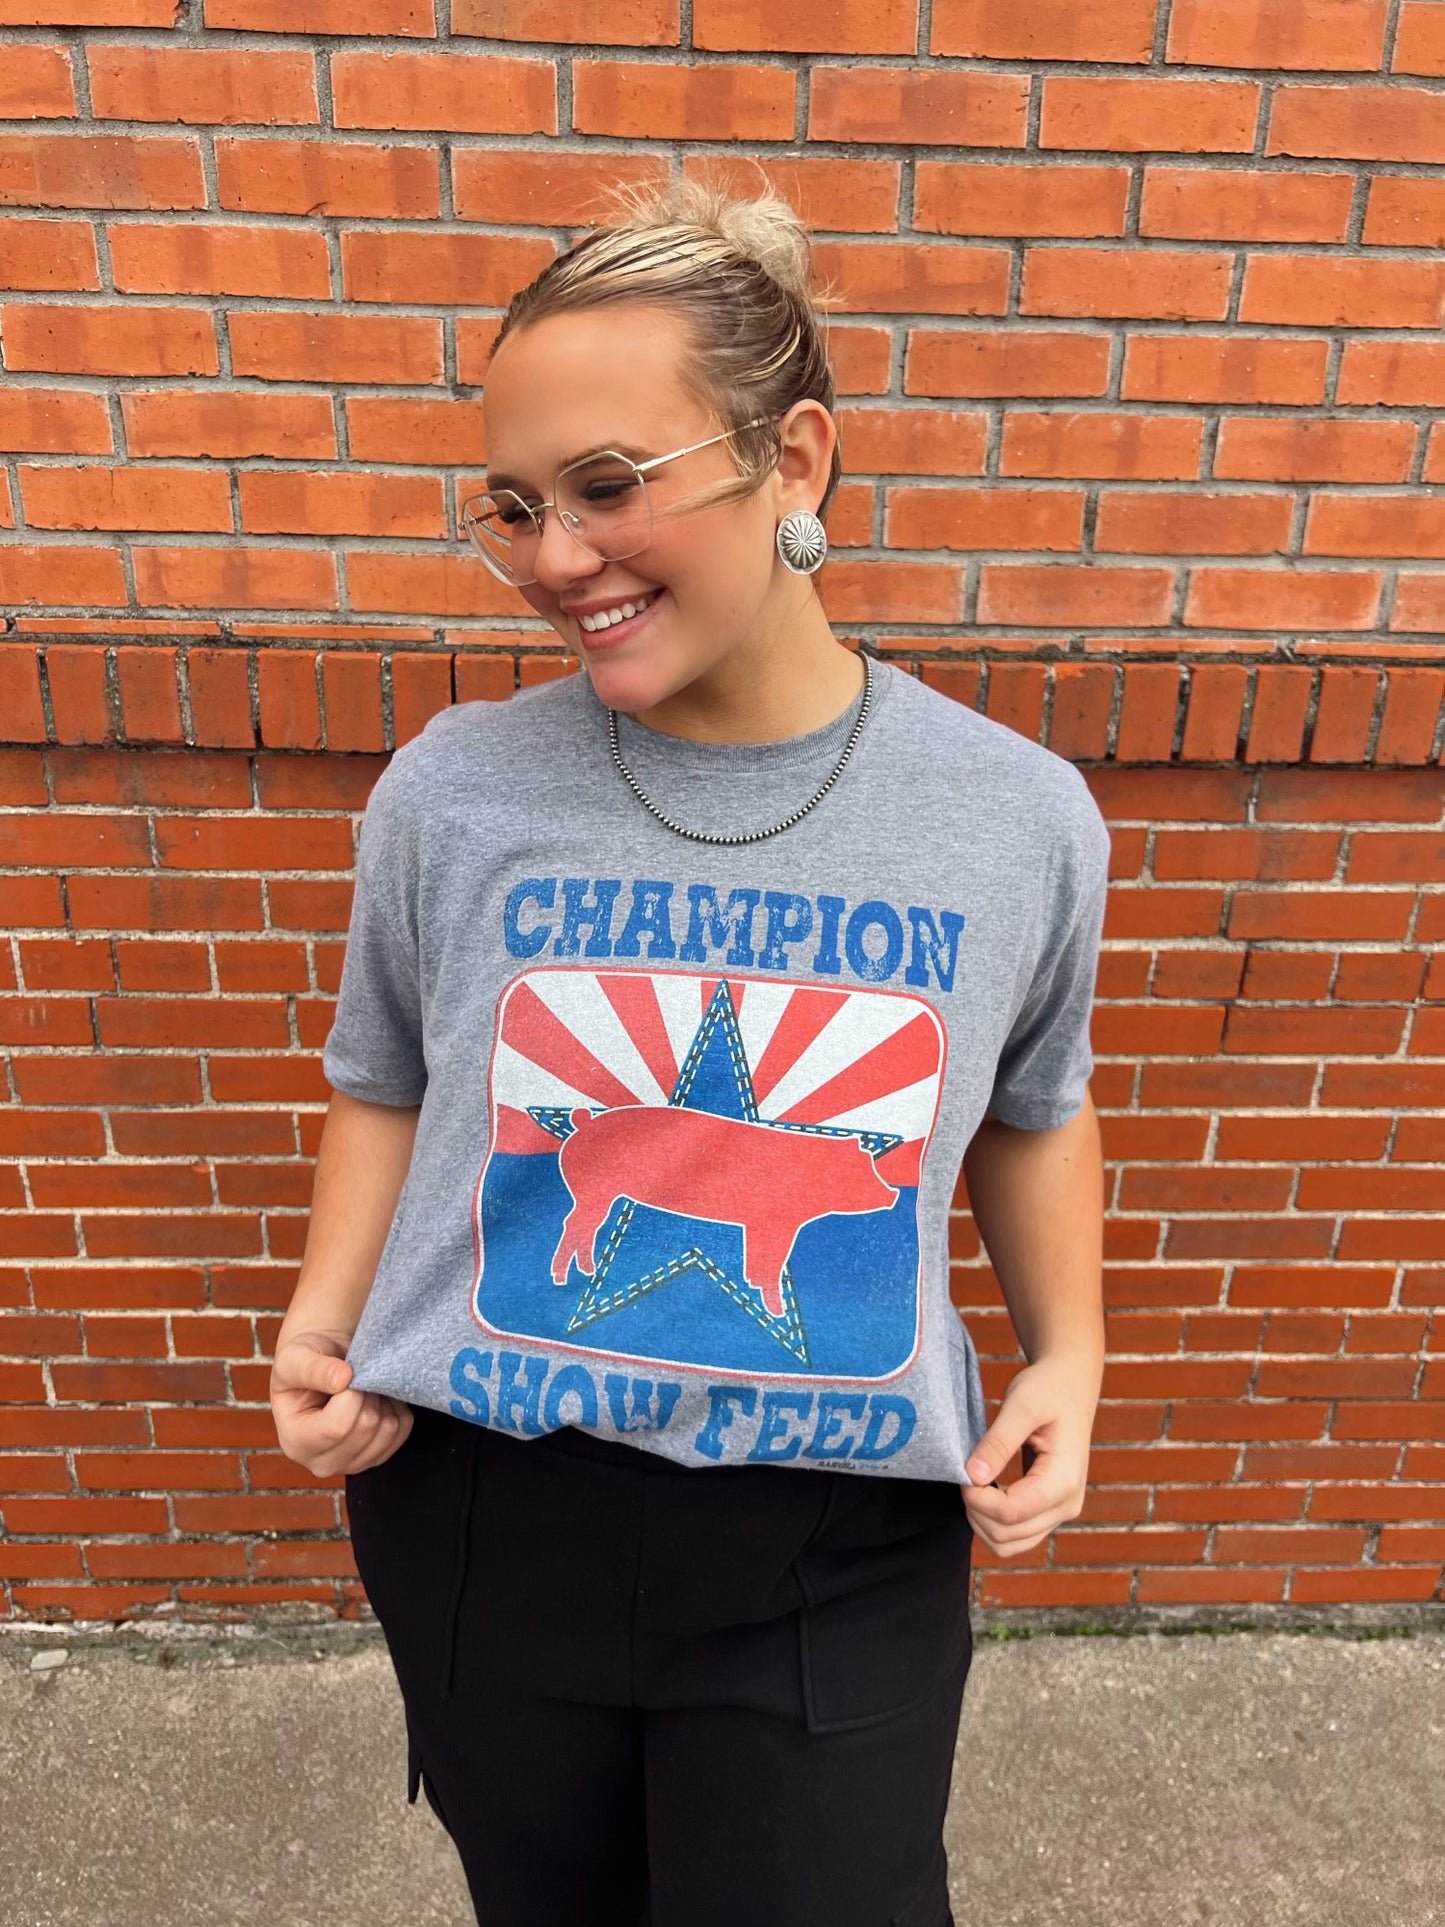 The Champion Show Feed Graphic Tee